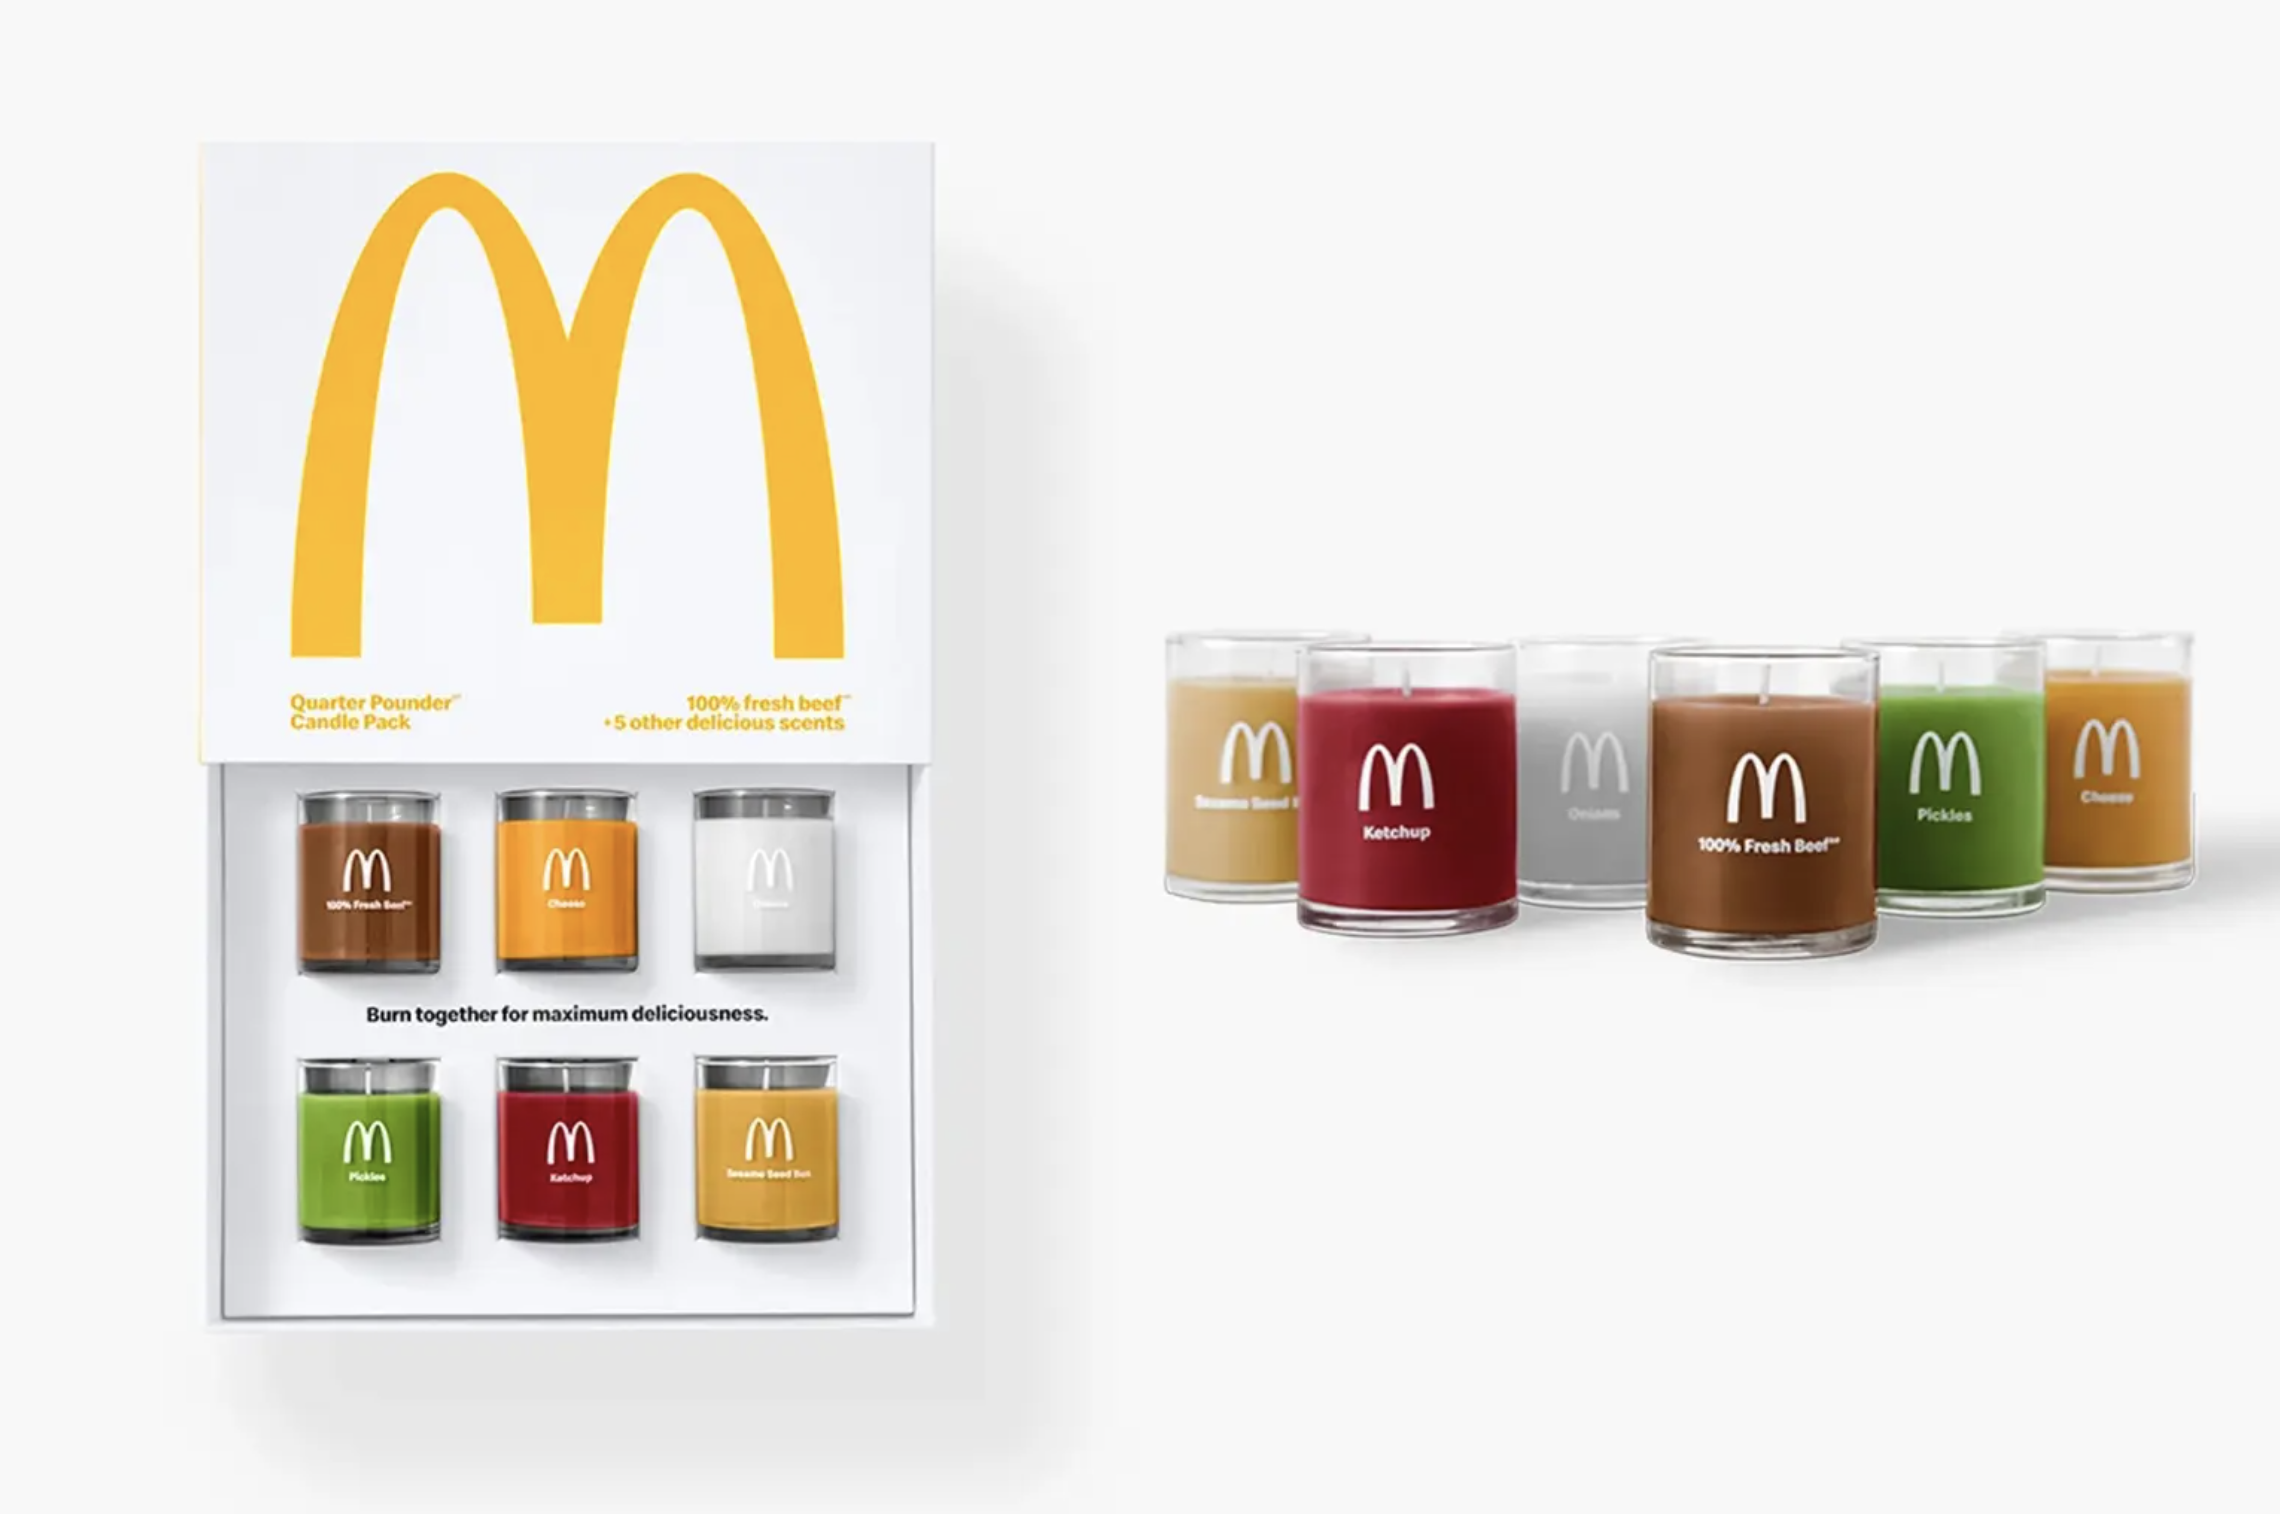 McDonald’s debuted a collection of “Quarter Pounder” scented candles as part of its Quarter Pounder Fan Club.